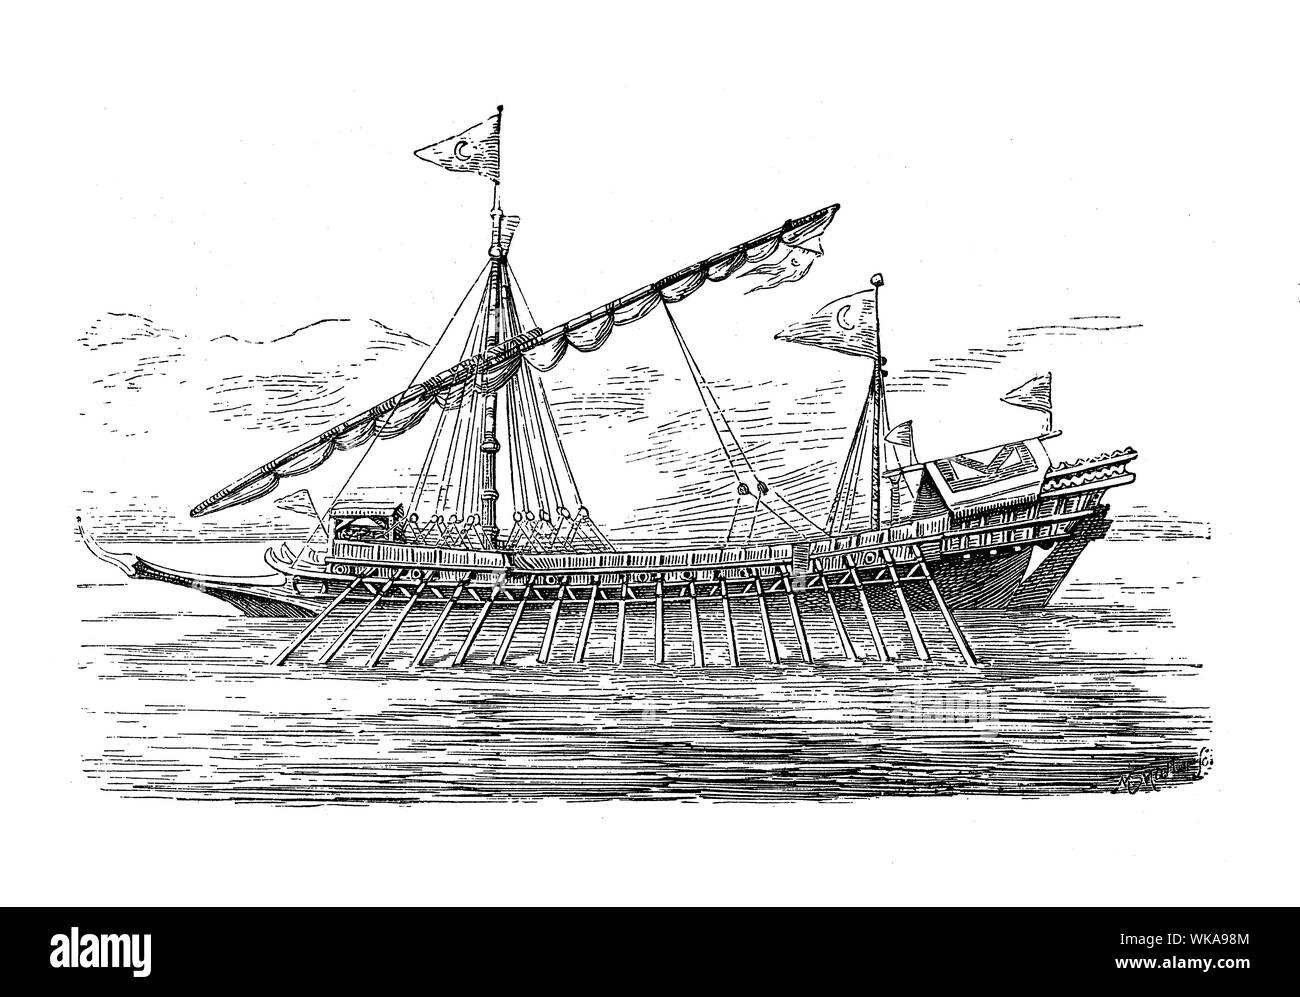 Turkish galley ship  with long, slender hull and shallow draft  propelled by rowing, 16th century Stock Photo